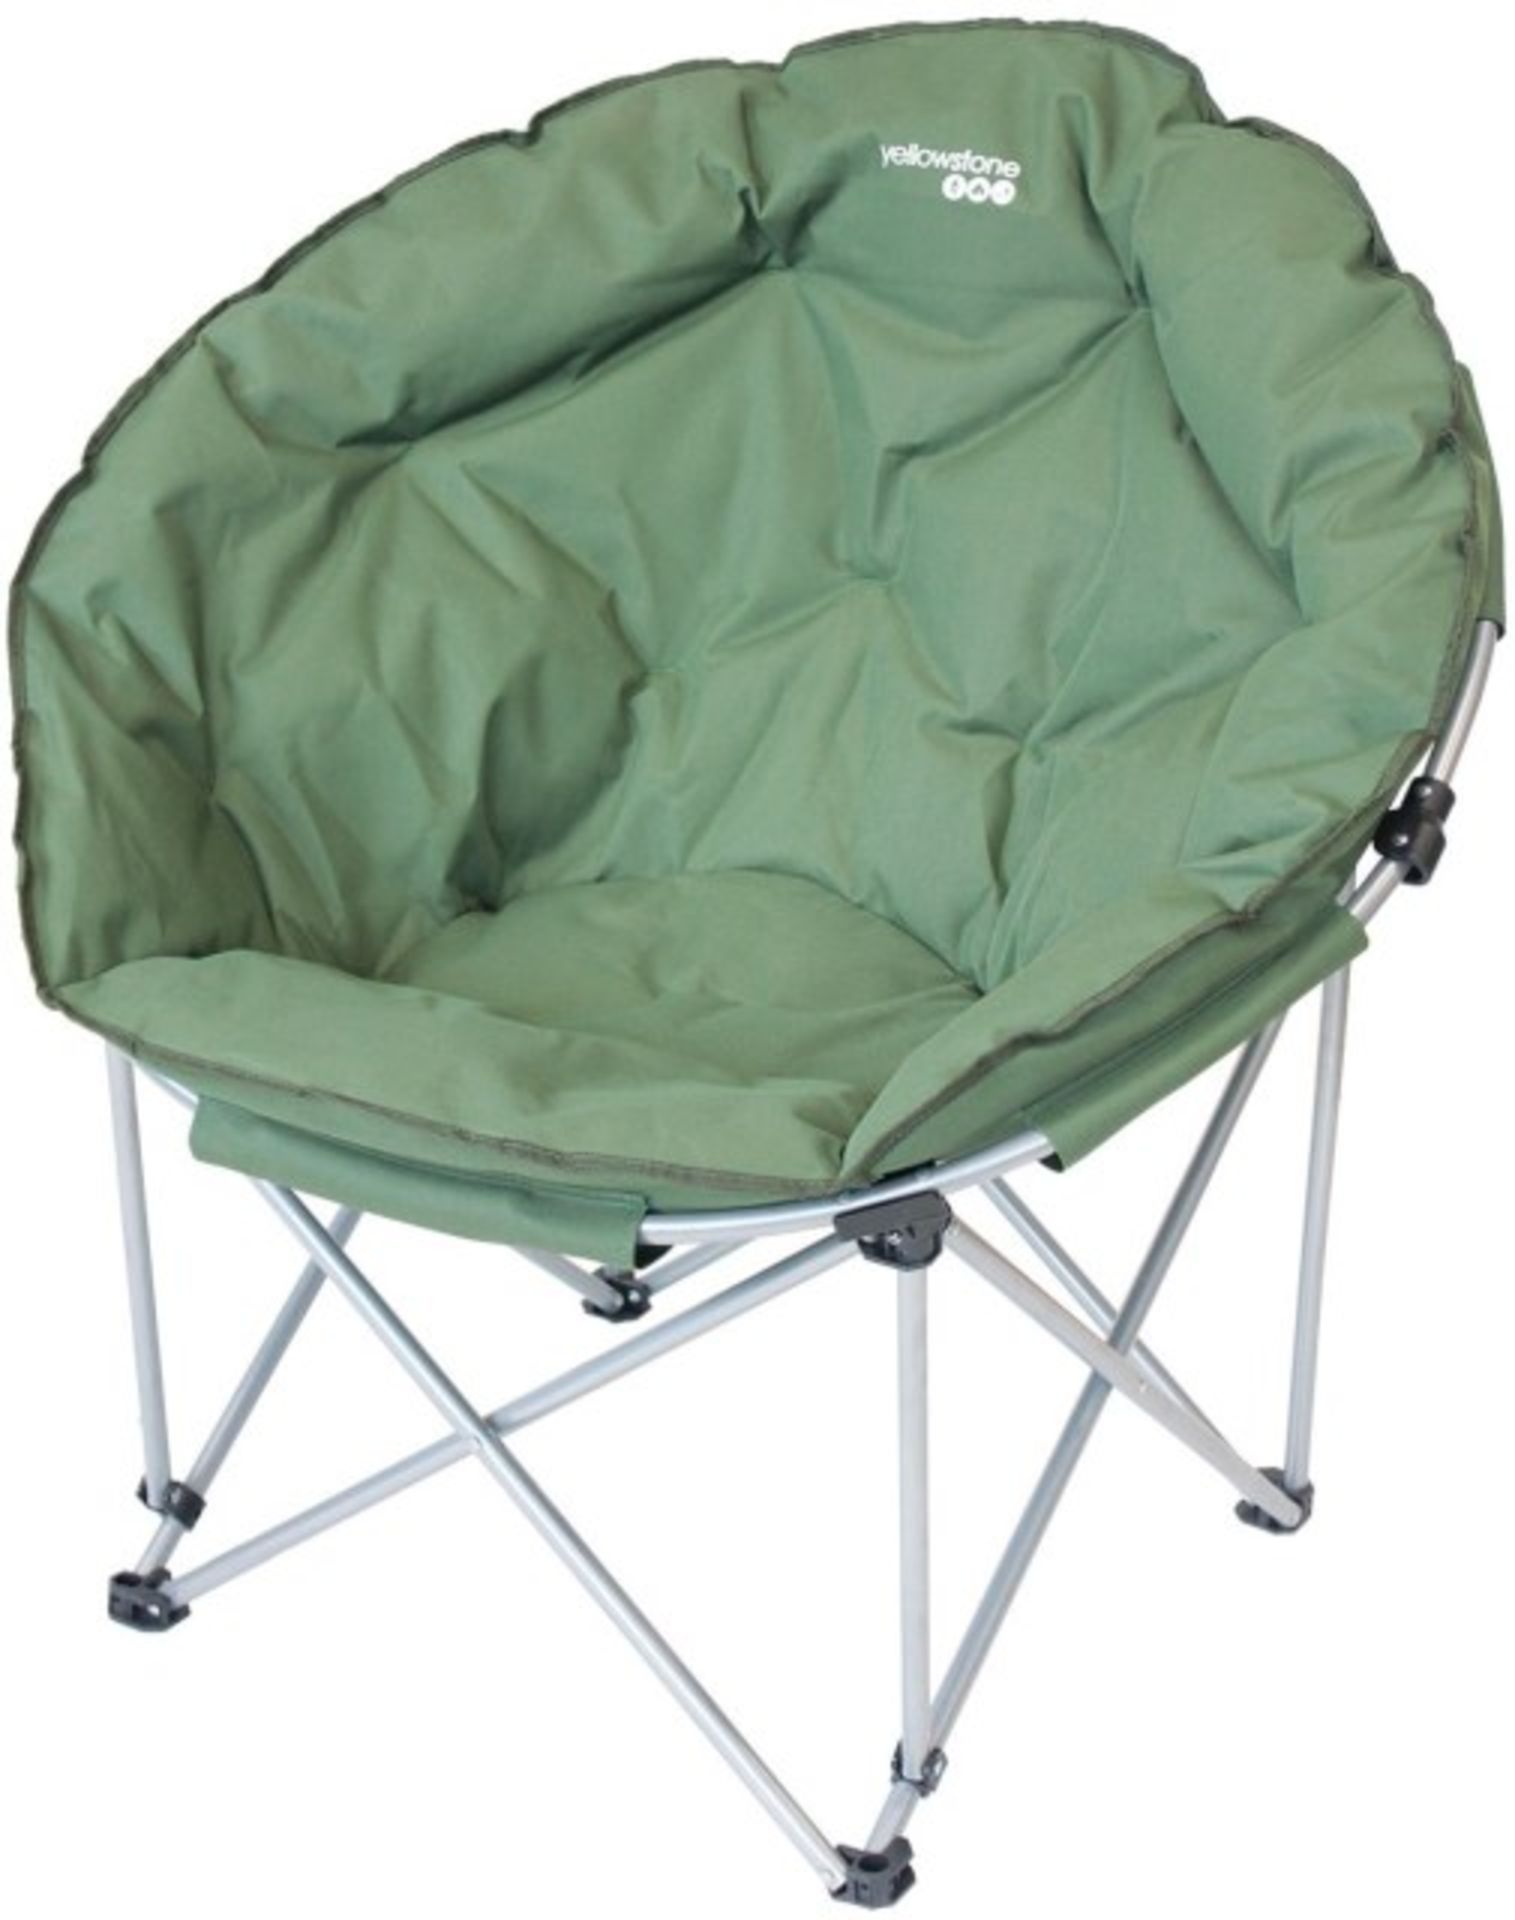 V Brand New Orbit Outdoor Green Leisure Chair RRP ú34.99 X 2 YOUR BID PRICE TO BE MULTIPLIED BY TWO